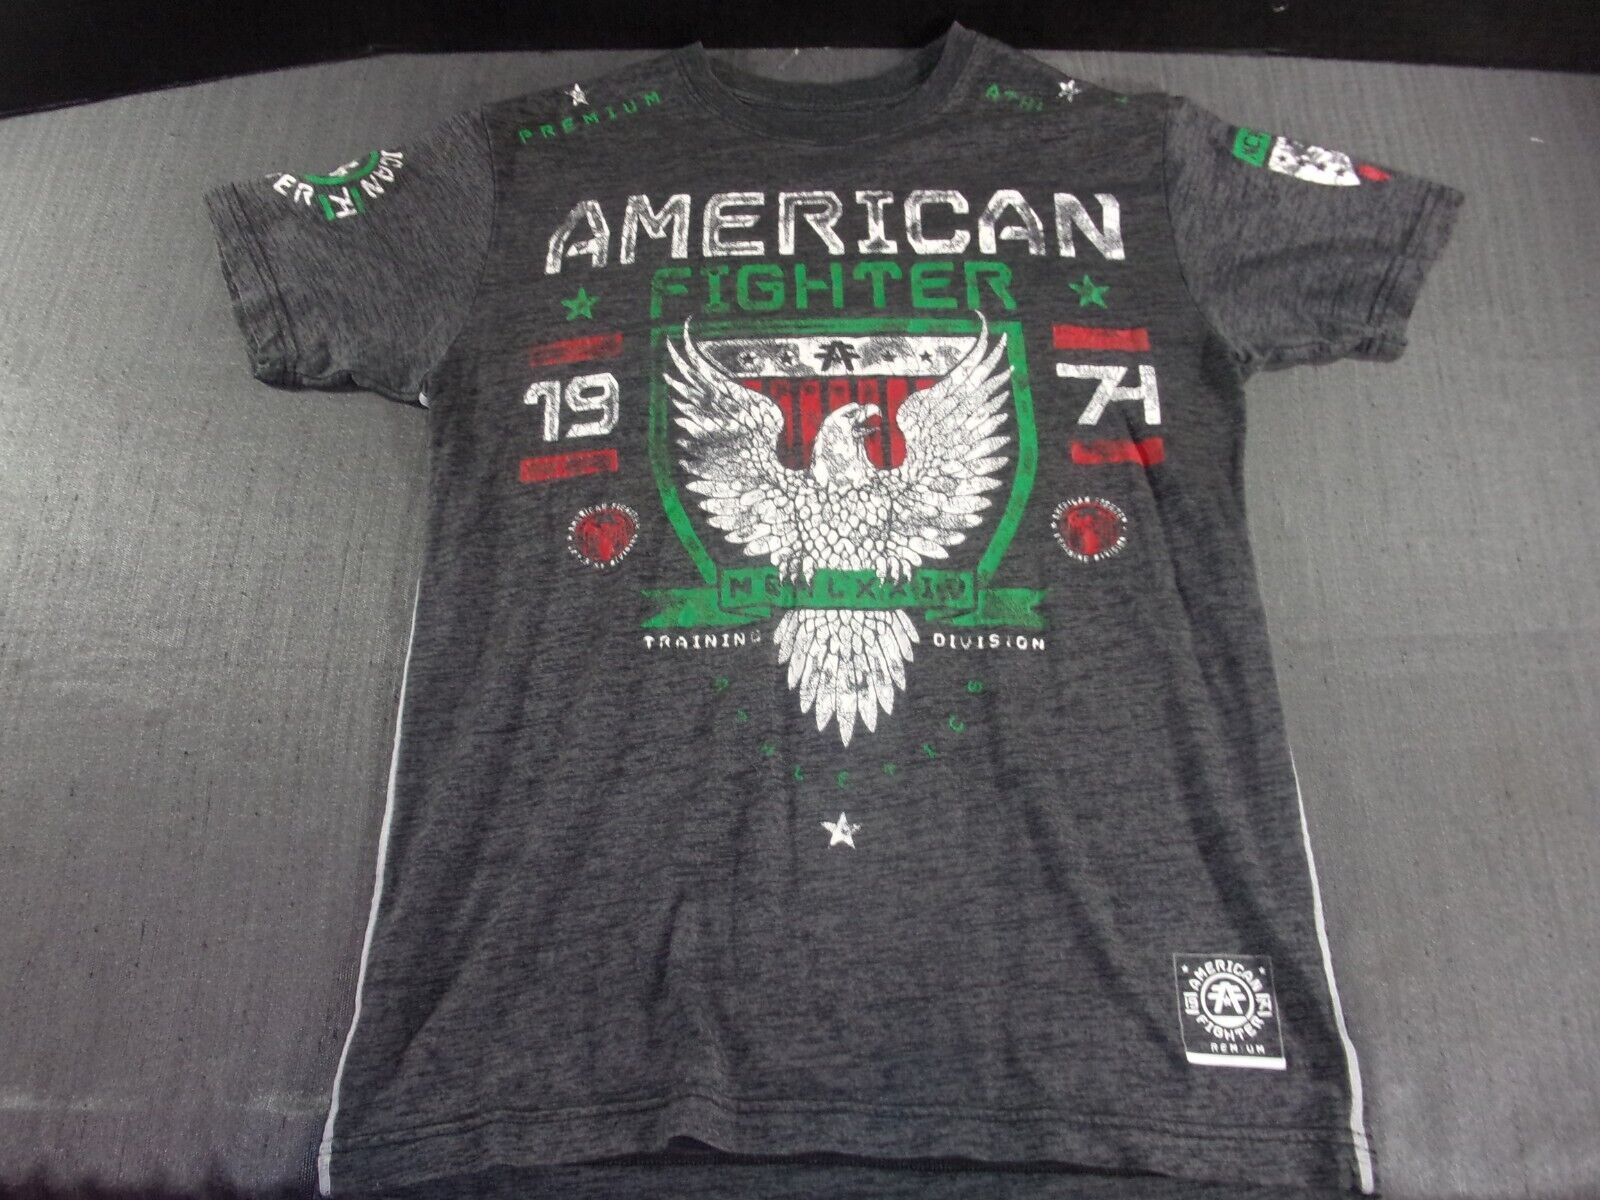 Primary image for BUCKLE AMERICAN FIGHTER TRAINING DIVISION MEDIUM GRAY POLYESTER T-SHIRT